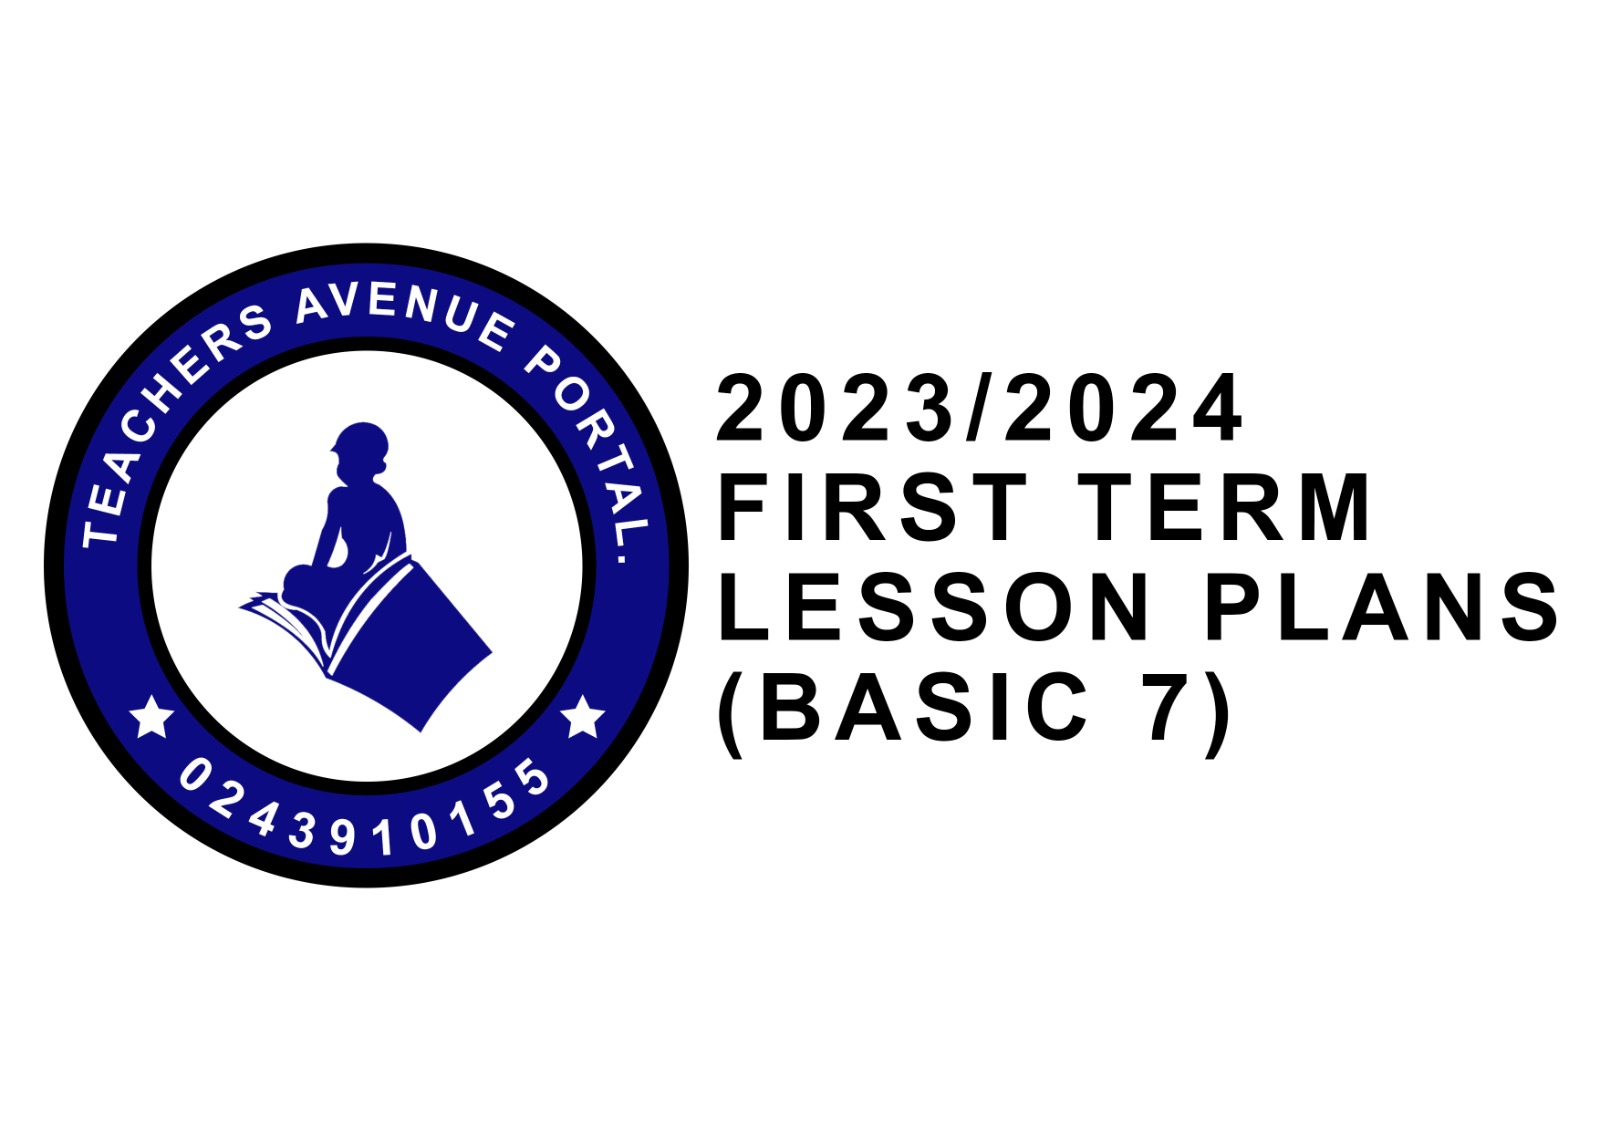 2023/2024 First Term Lesson Plans For Basic Seven